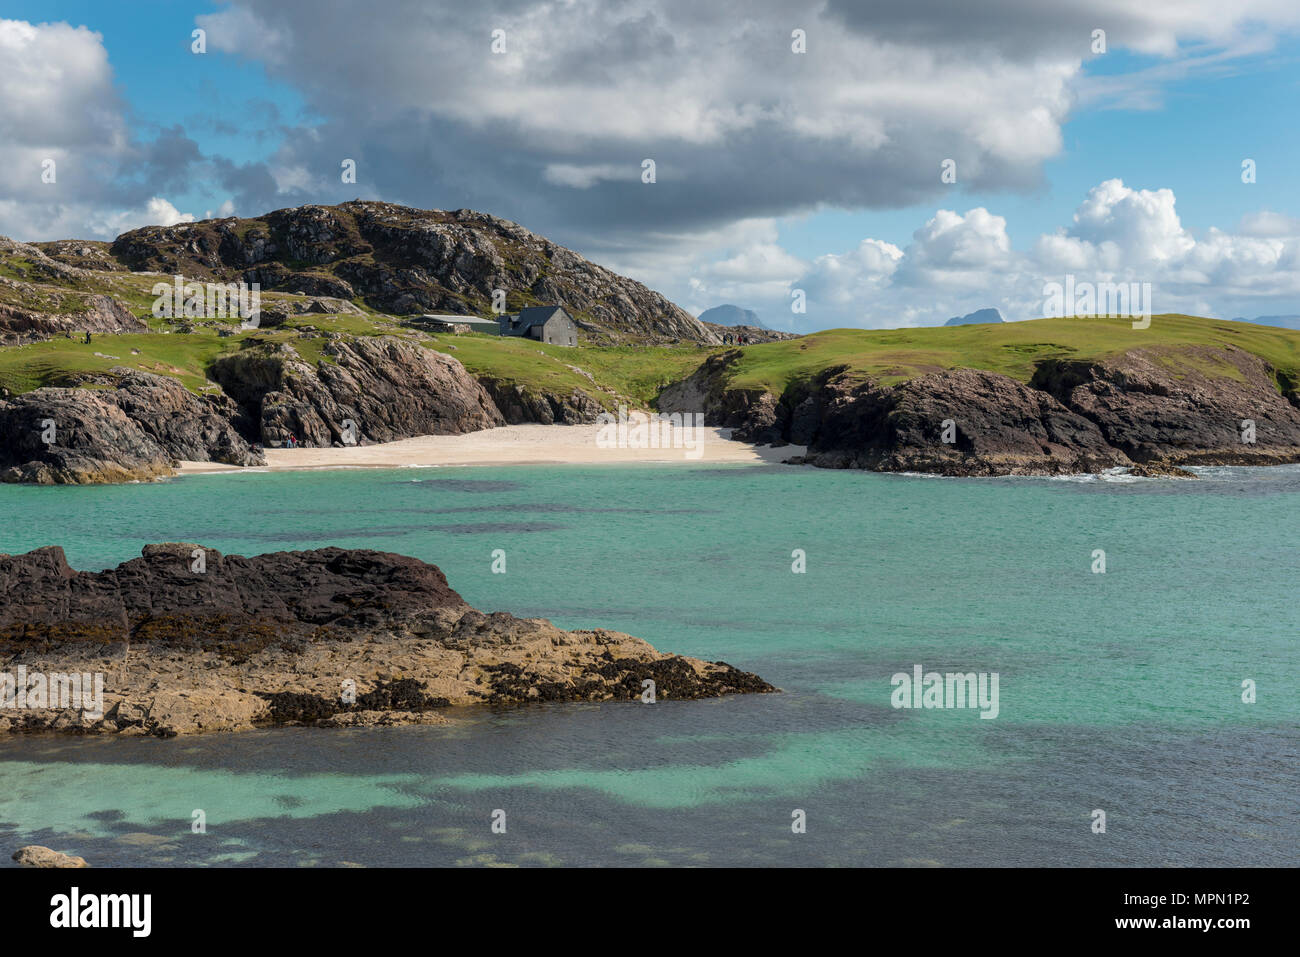 United Kingdom, Scotland, Sutherland, Assynt, Clachtoll, Beach at Bay Clachtoll Stock Photo